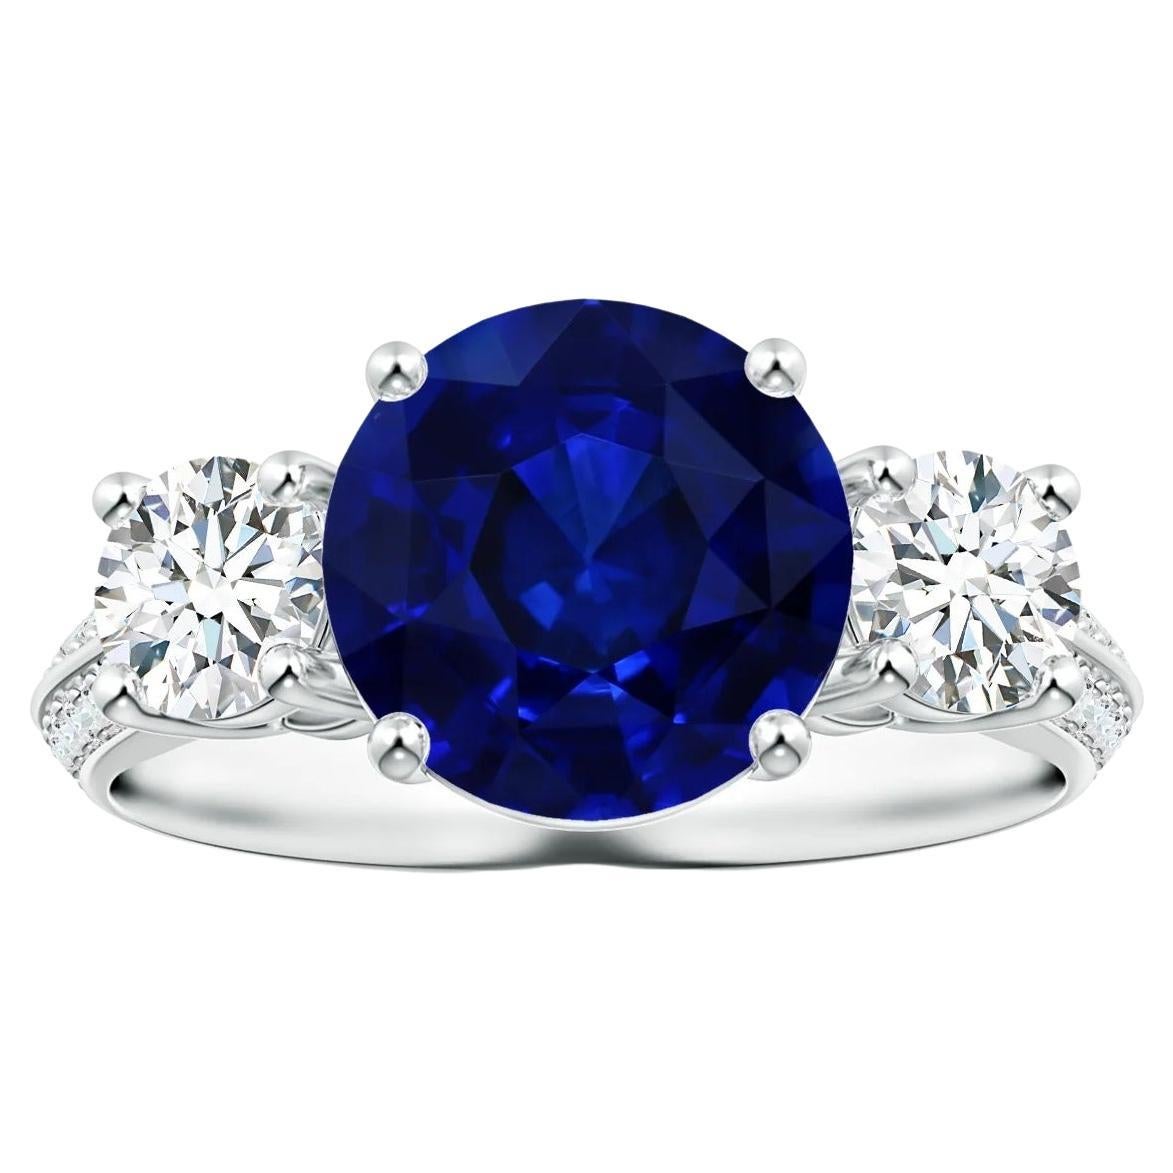 Angara Gia Certified Natural Blue Sapphire Ring in White Gold with Diamonds